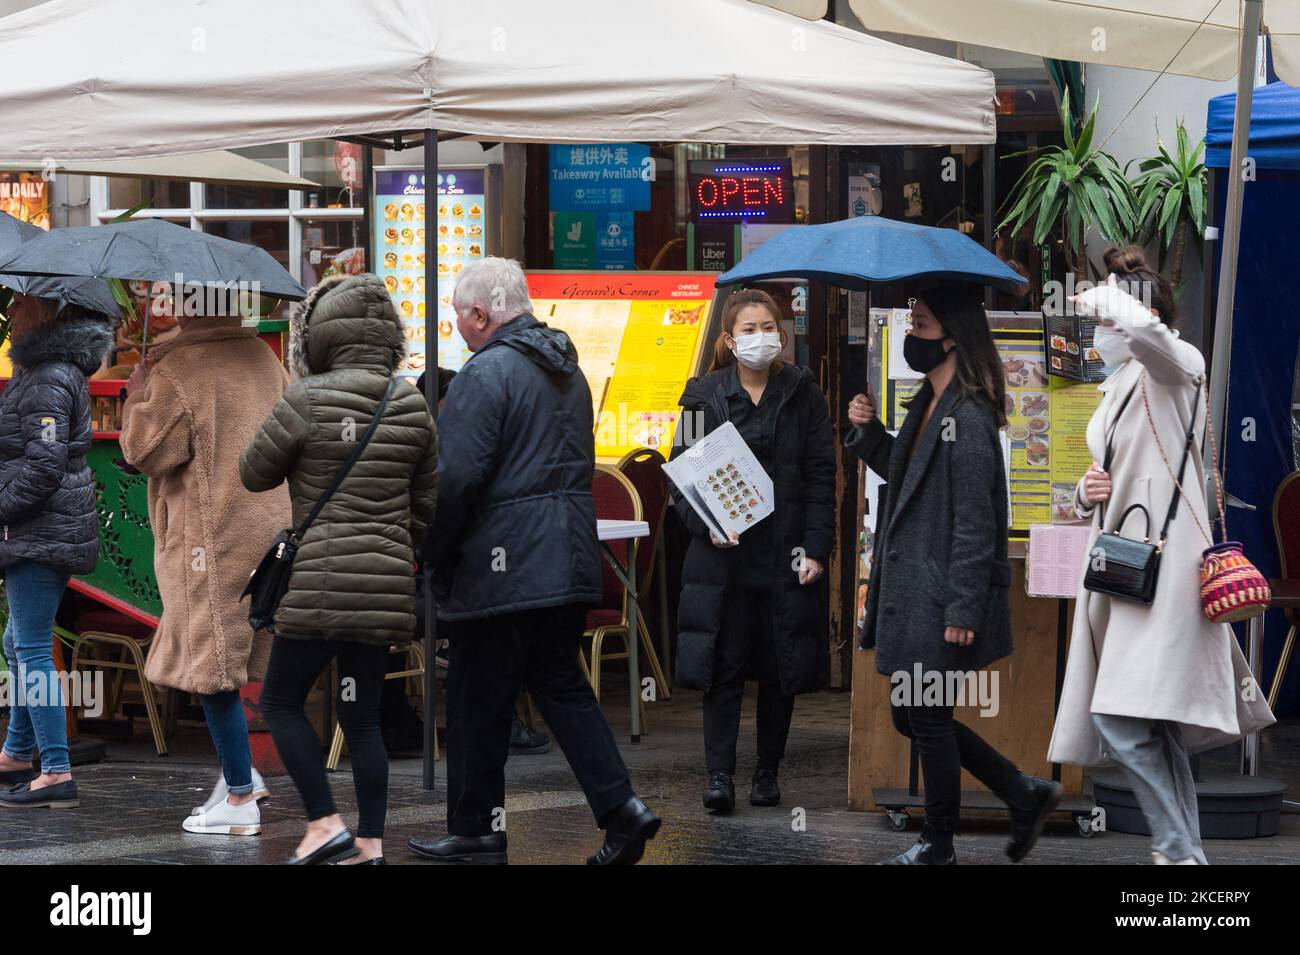 LONDON, UNITED KINGDOM - MAY 17, 2021: A waiter stands with a menu outside a restaurant in Chinatown while pedestrians shetlter from the rain as England moves to Step 3 in easing of coronavirus restrictions, on 17 May, 2021 in London, England. From today indoor hospitality and entertainment venues are allowed to re-open, six people or two households can meet indoors and international travel without need for quarantine resumes to 12 green list countries, however there are concerns that the surge in cases of the Indian Covid variant may delay the fourth stage of easing lockdown on June 21. (Phot Stock Photo